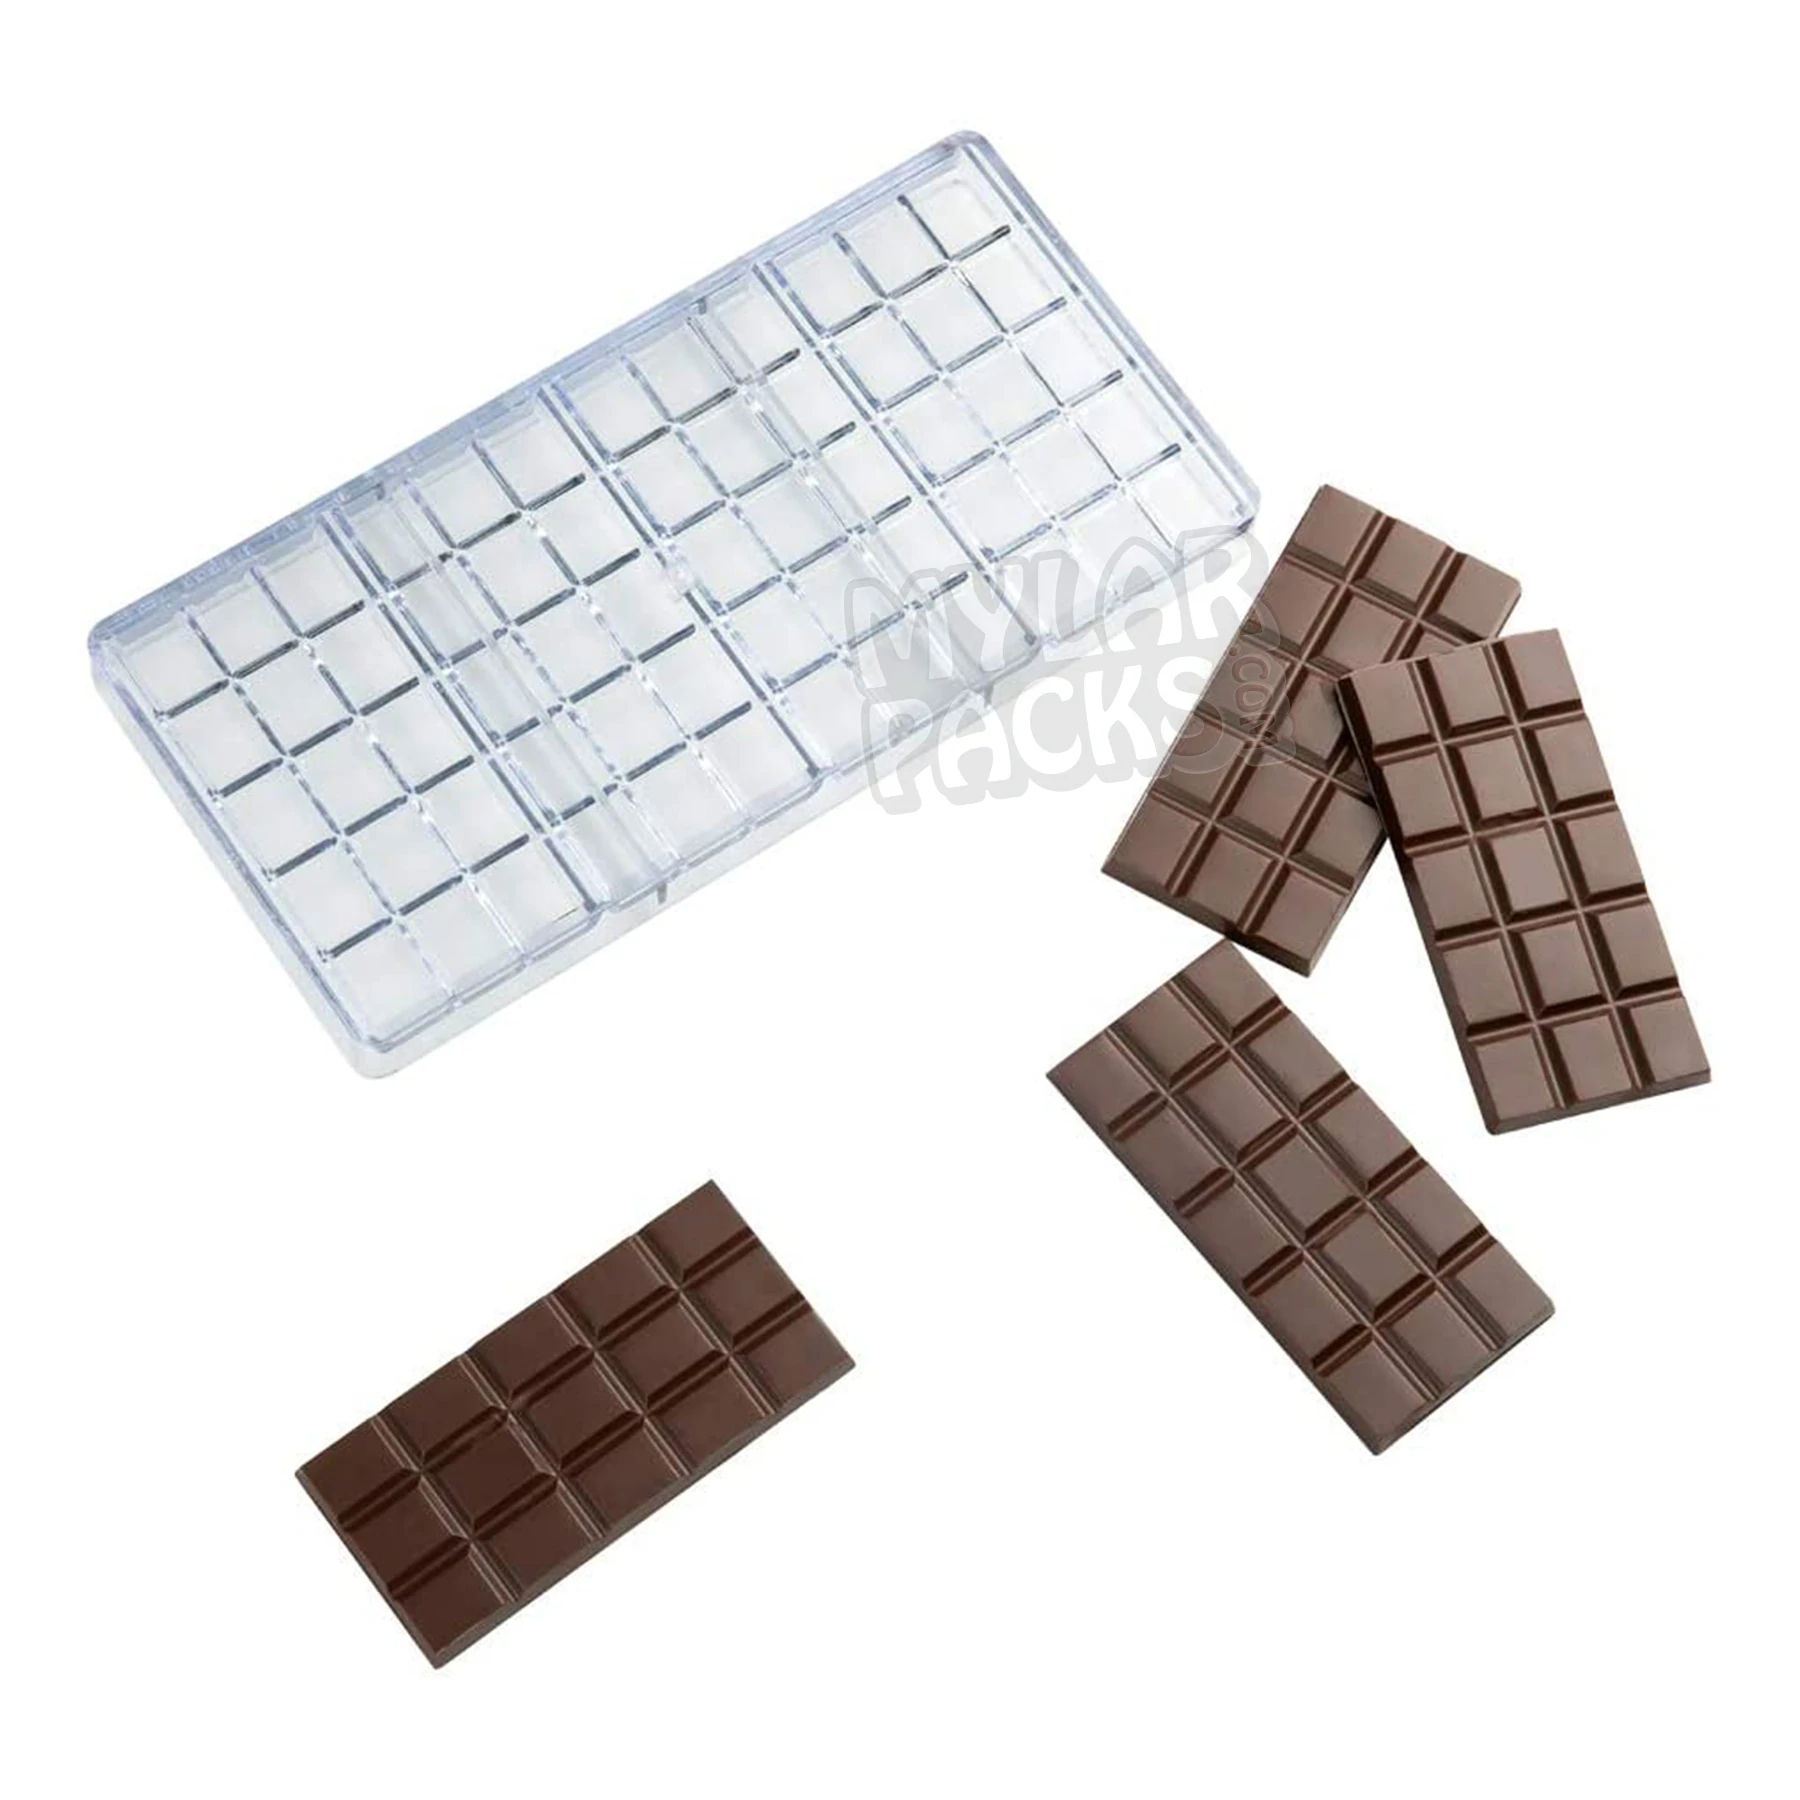 PolkaDot Chocolate Molds: Multiverse, Space Bar Moulds + More